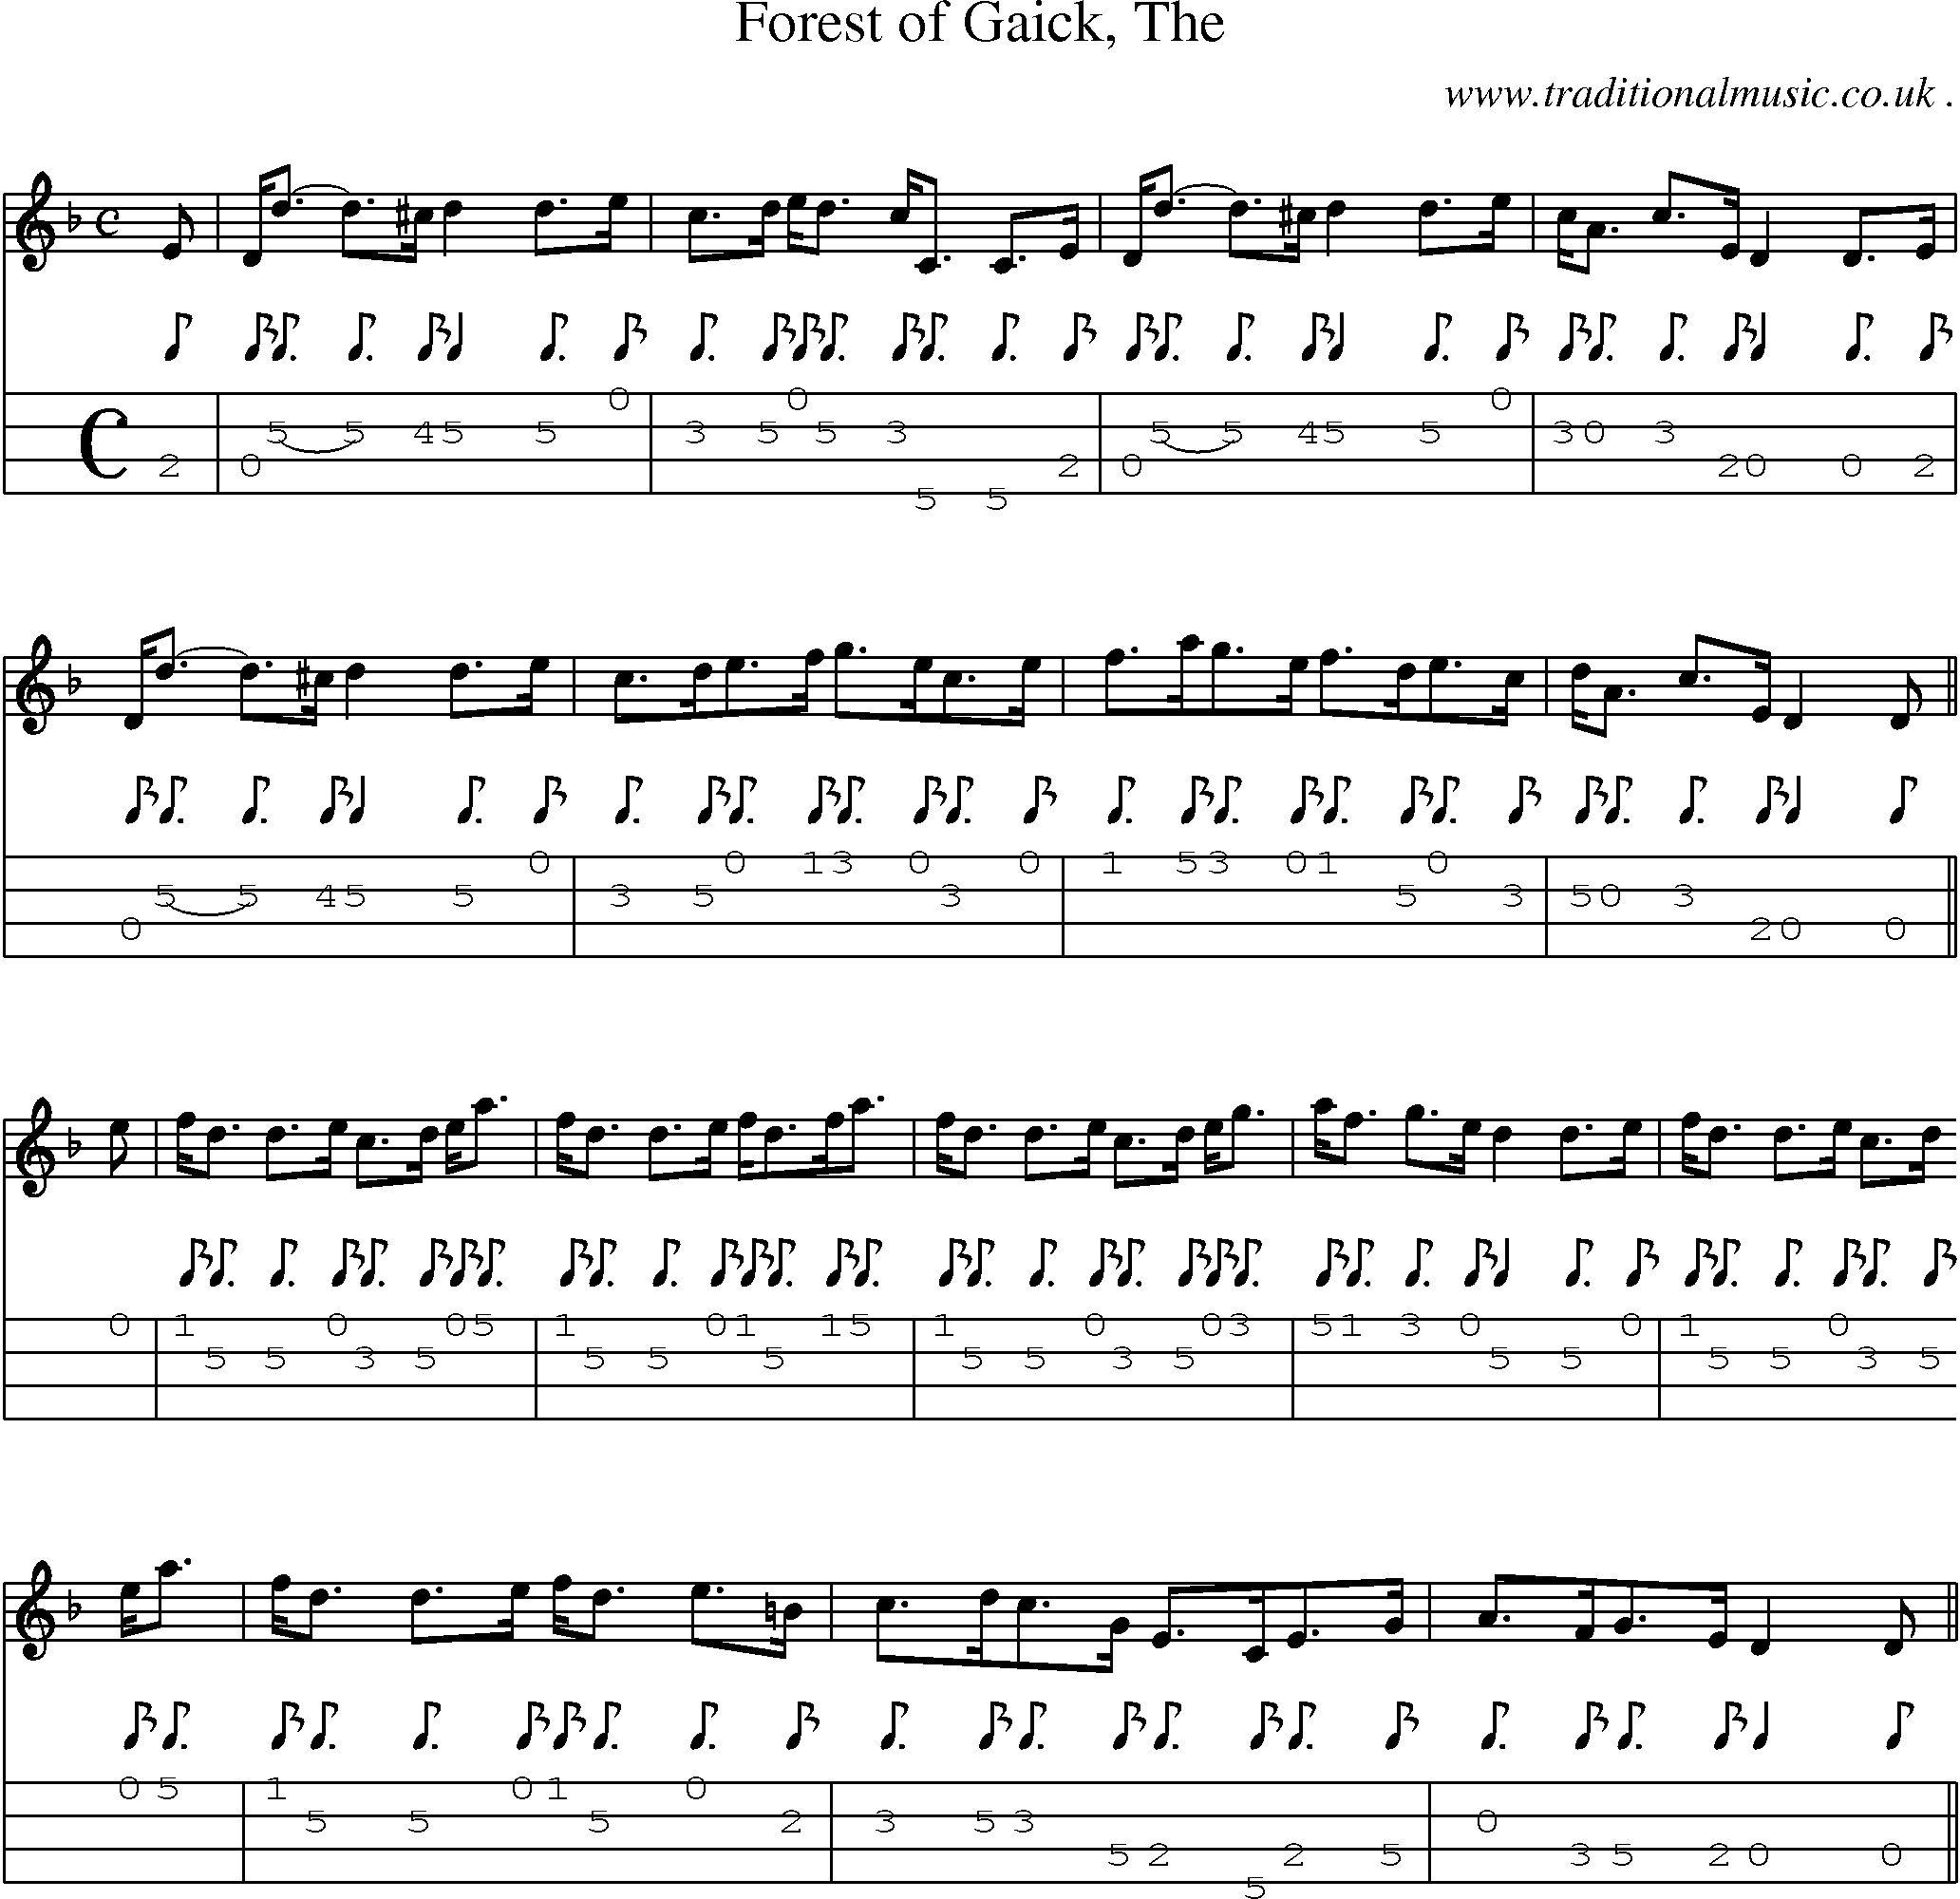 Sheet-music  score, Chords and Mandolin Tabs for Forest Of Gaick The